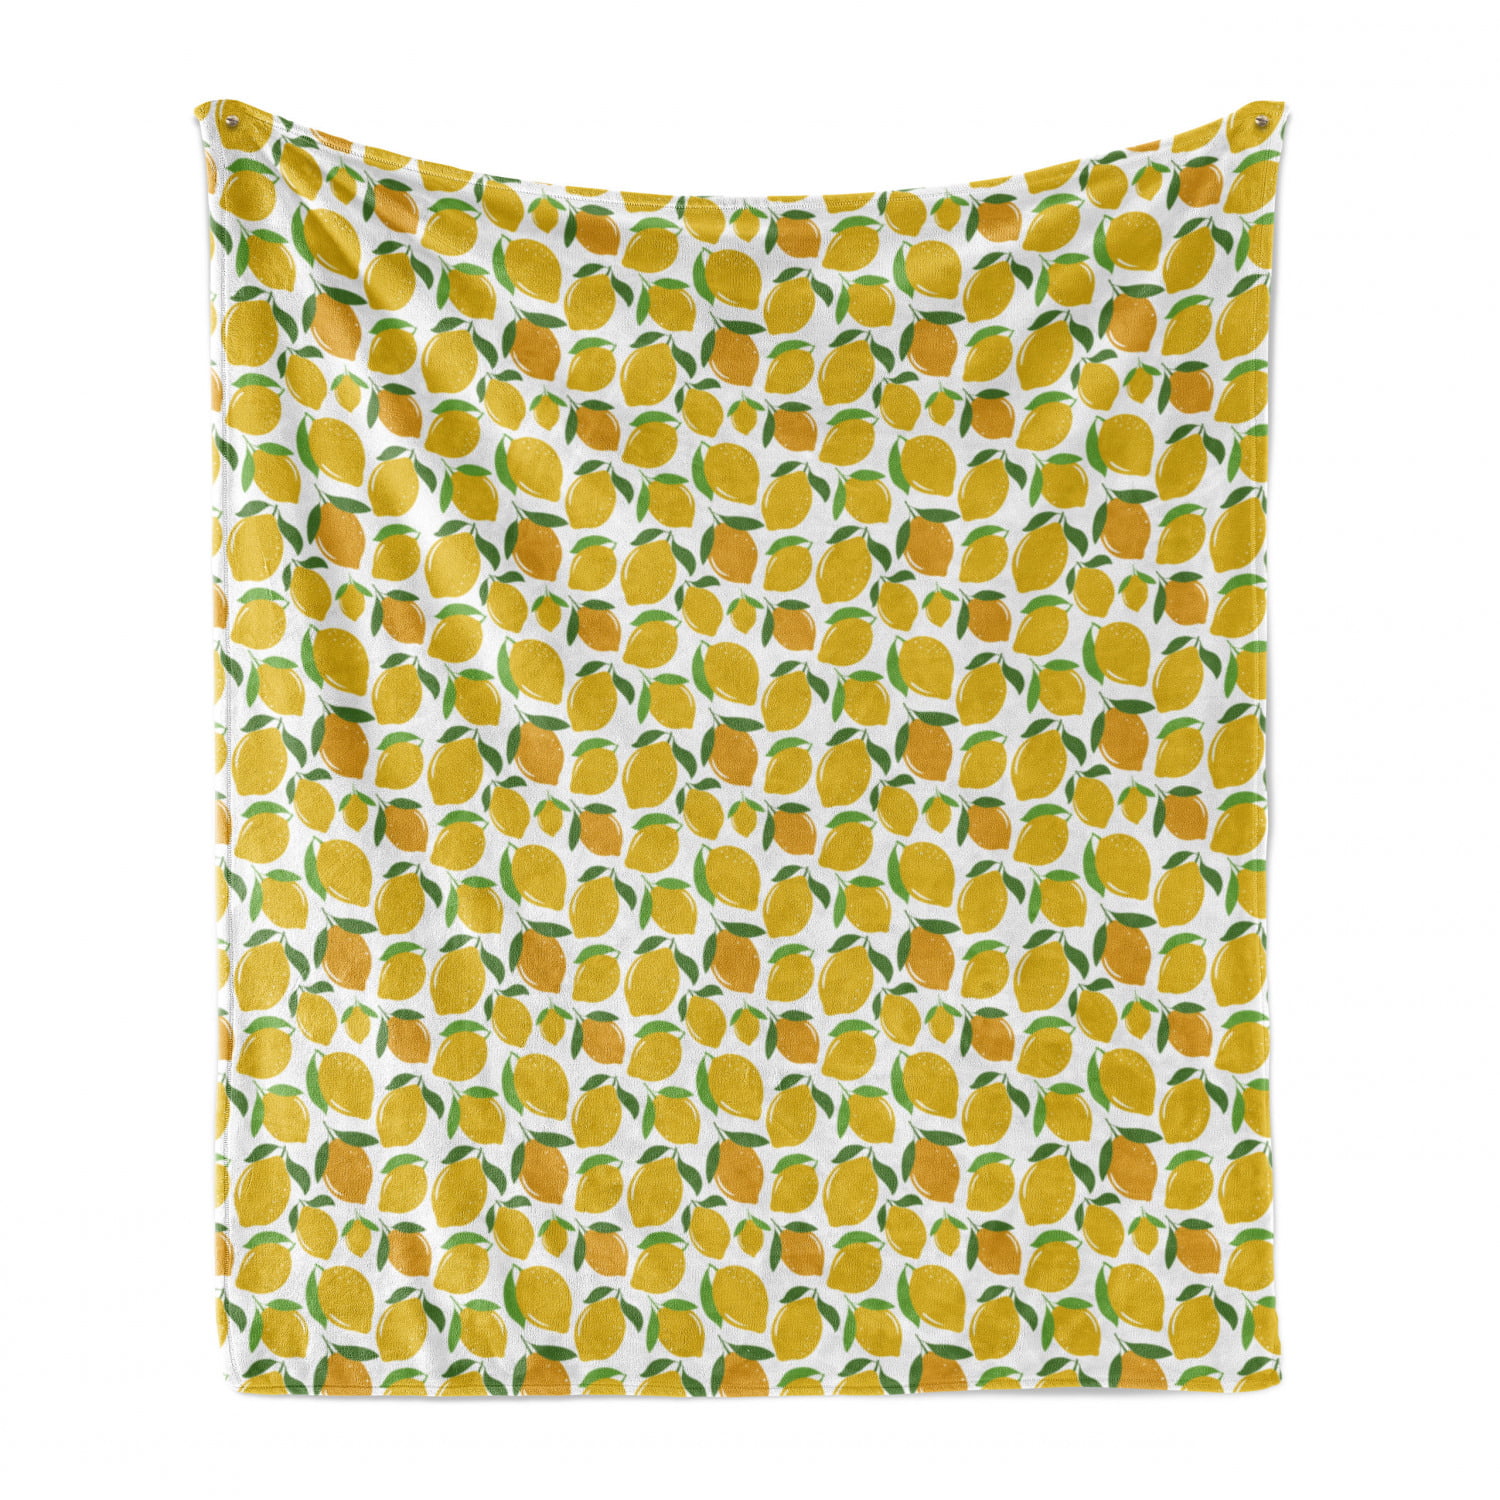 70 x 90 Flannel Fleece Accent Piece Soft Couch Cover for Adults Lemon Blossoms Leaves Citrus on Tree on Striped Background Seafoam Mustard Ambesonne Lemons Throw Blanket